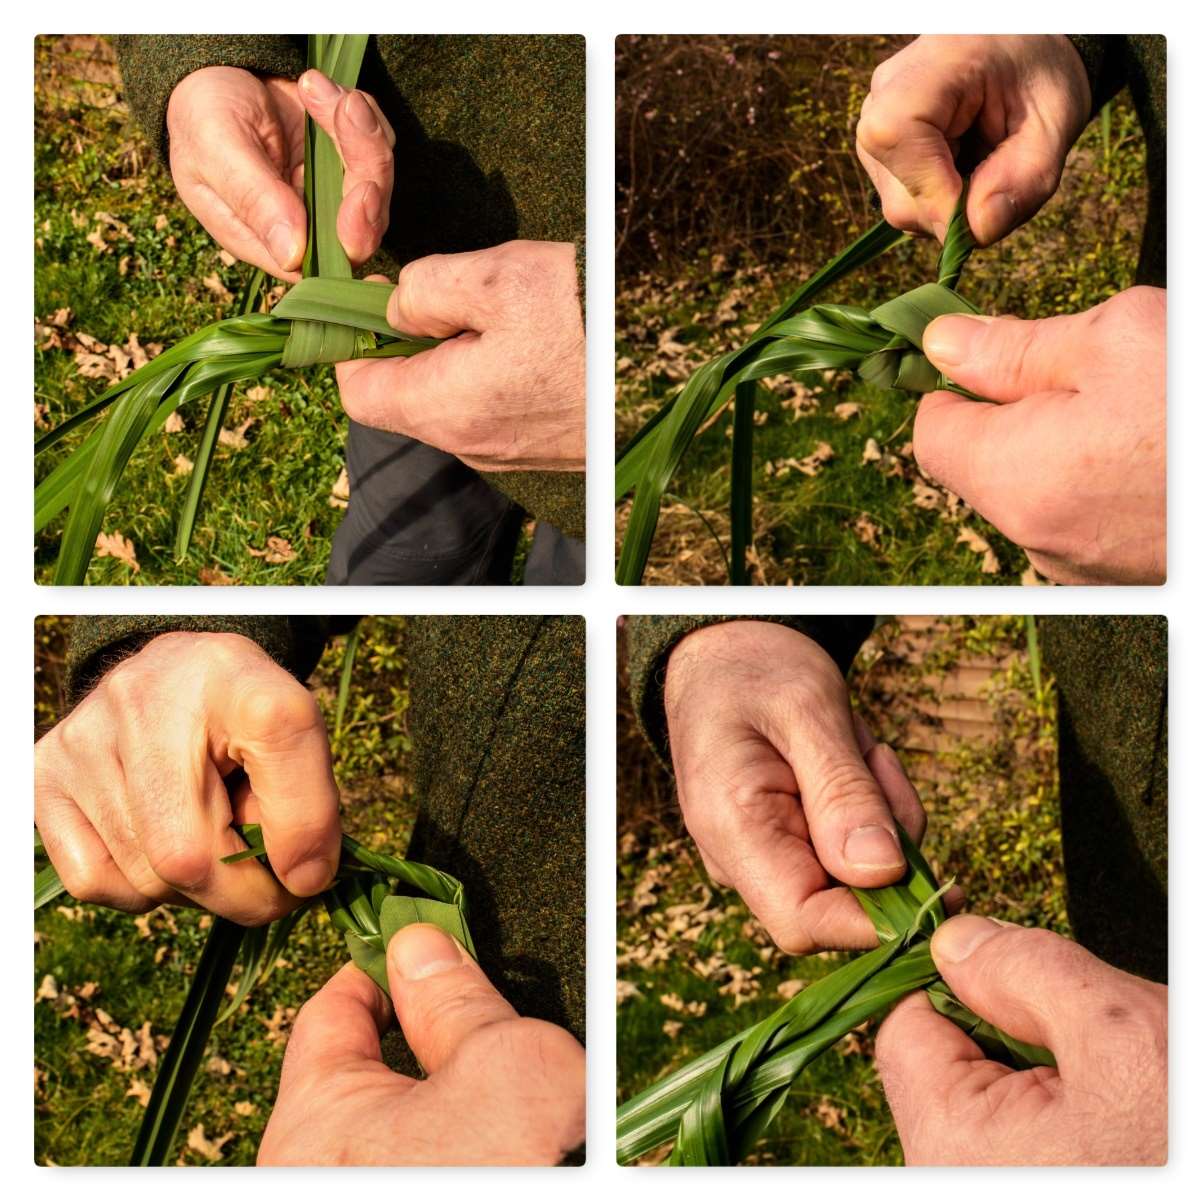 How To Make Cordage From Grass